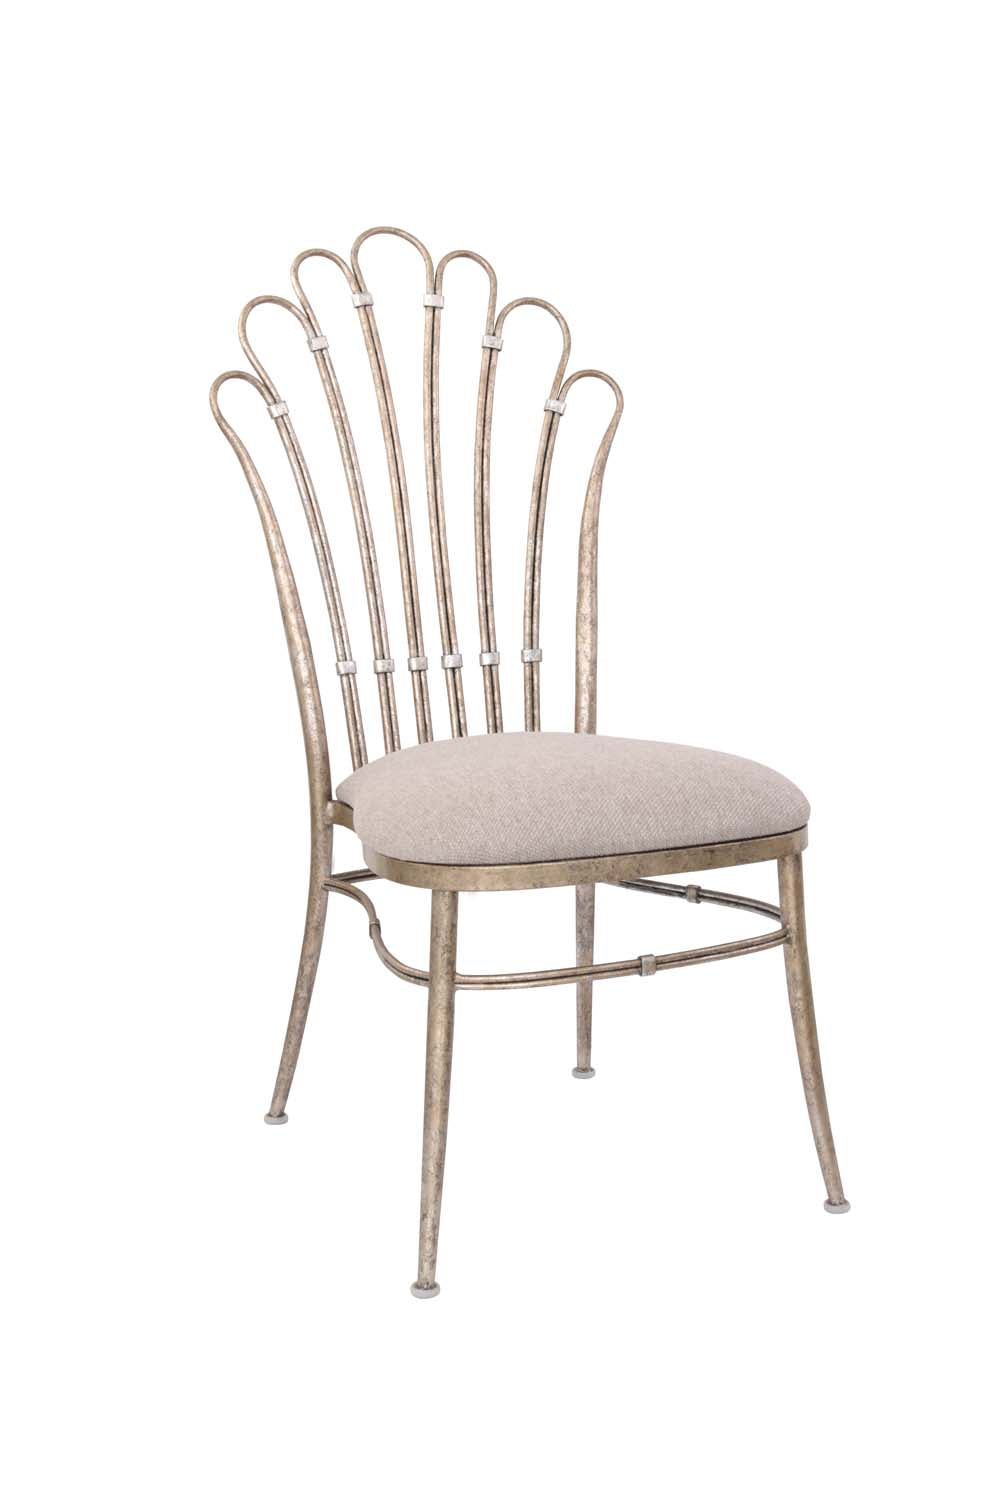 Kalco - 800201PT - Dining Chair - Biscayne